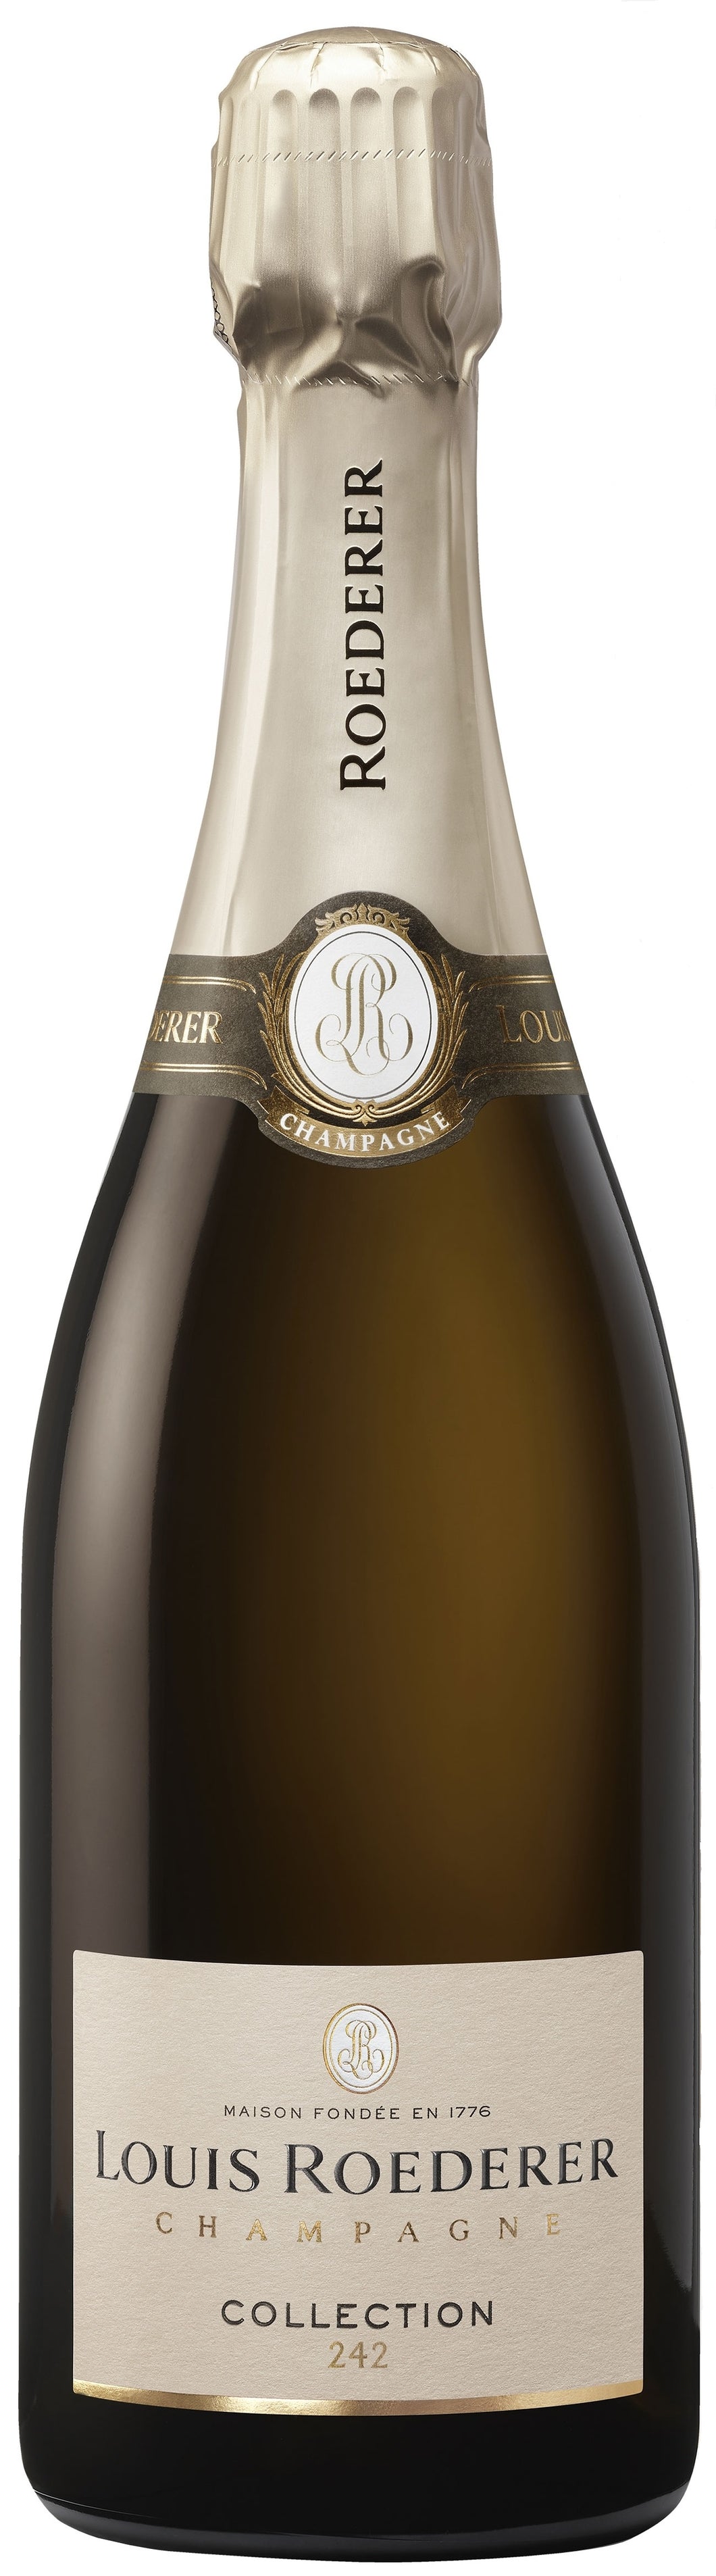 LOUIS ROEDERER COLLECTION 242 BRUT 75 cL 12 %